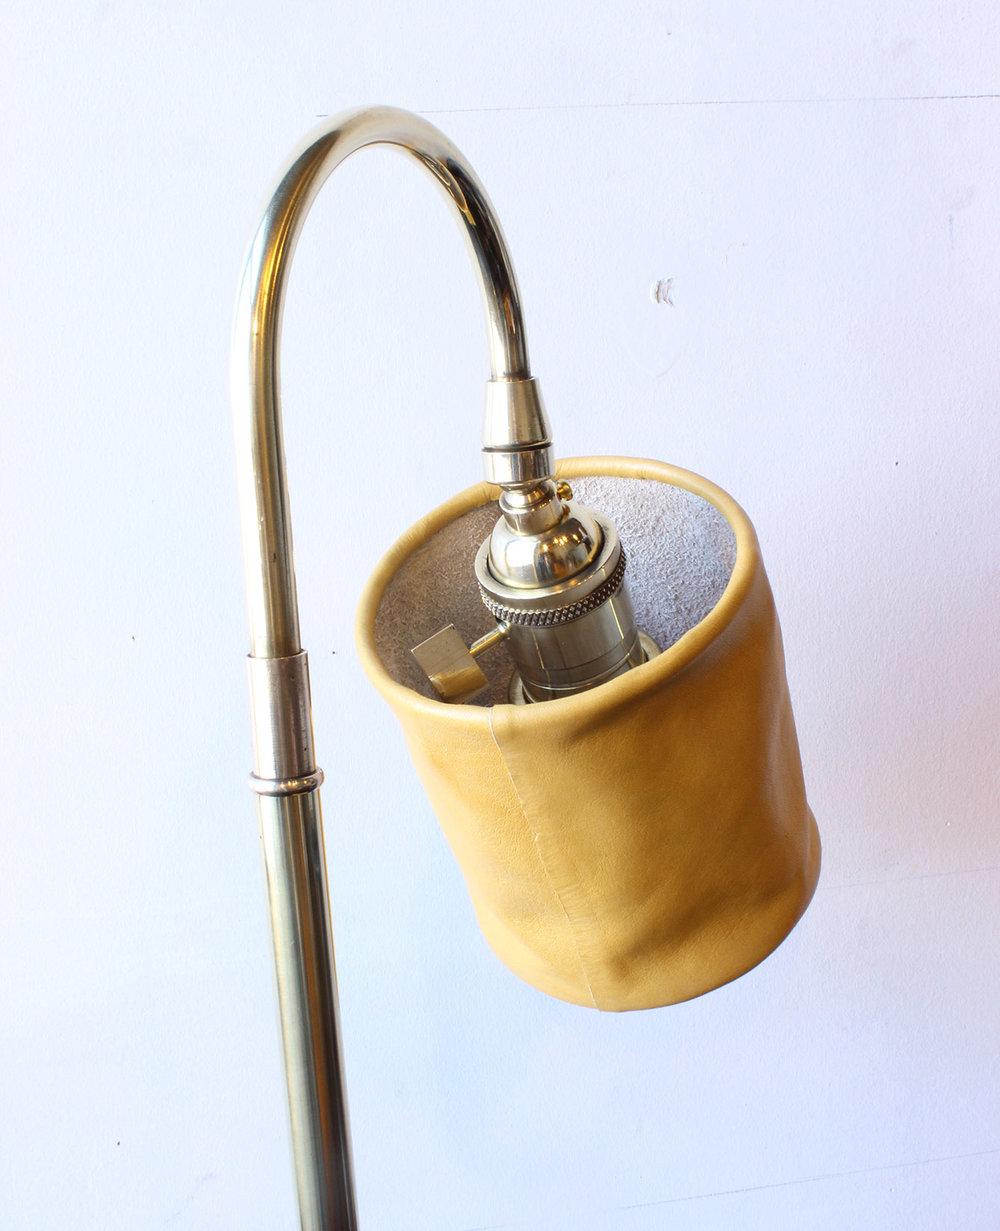 American Series 01 Desk Lamp Hand-Dyed Mustard Yellow Leather Polished Un-Lacquered Brass For Sale